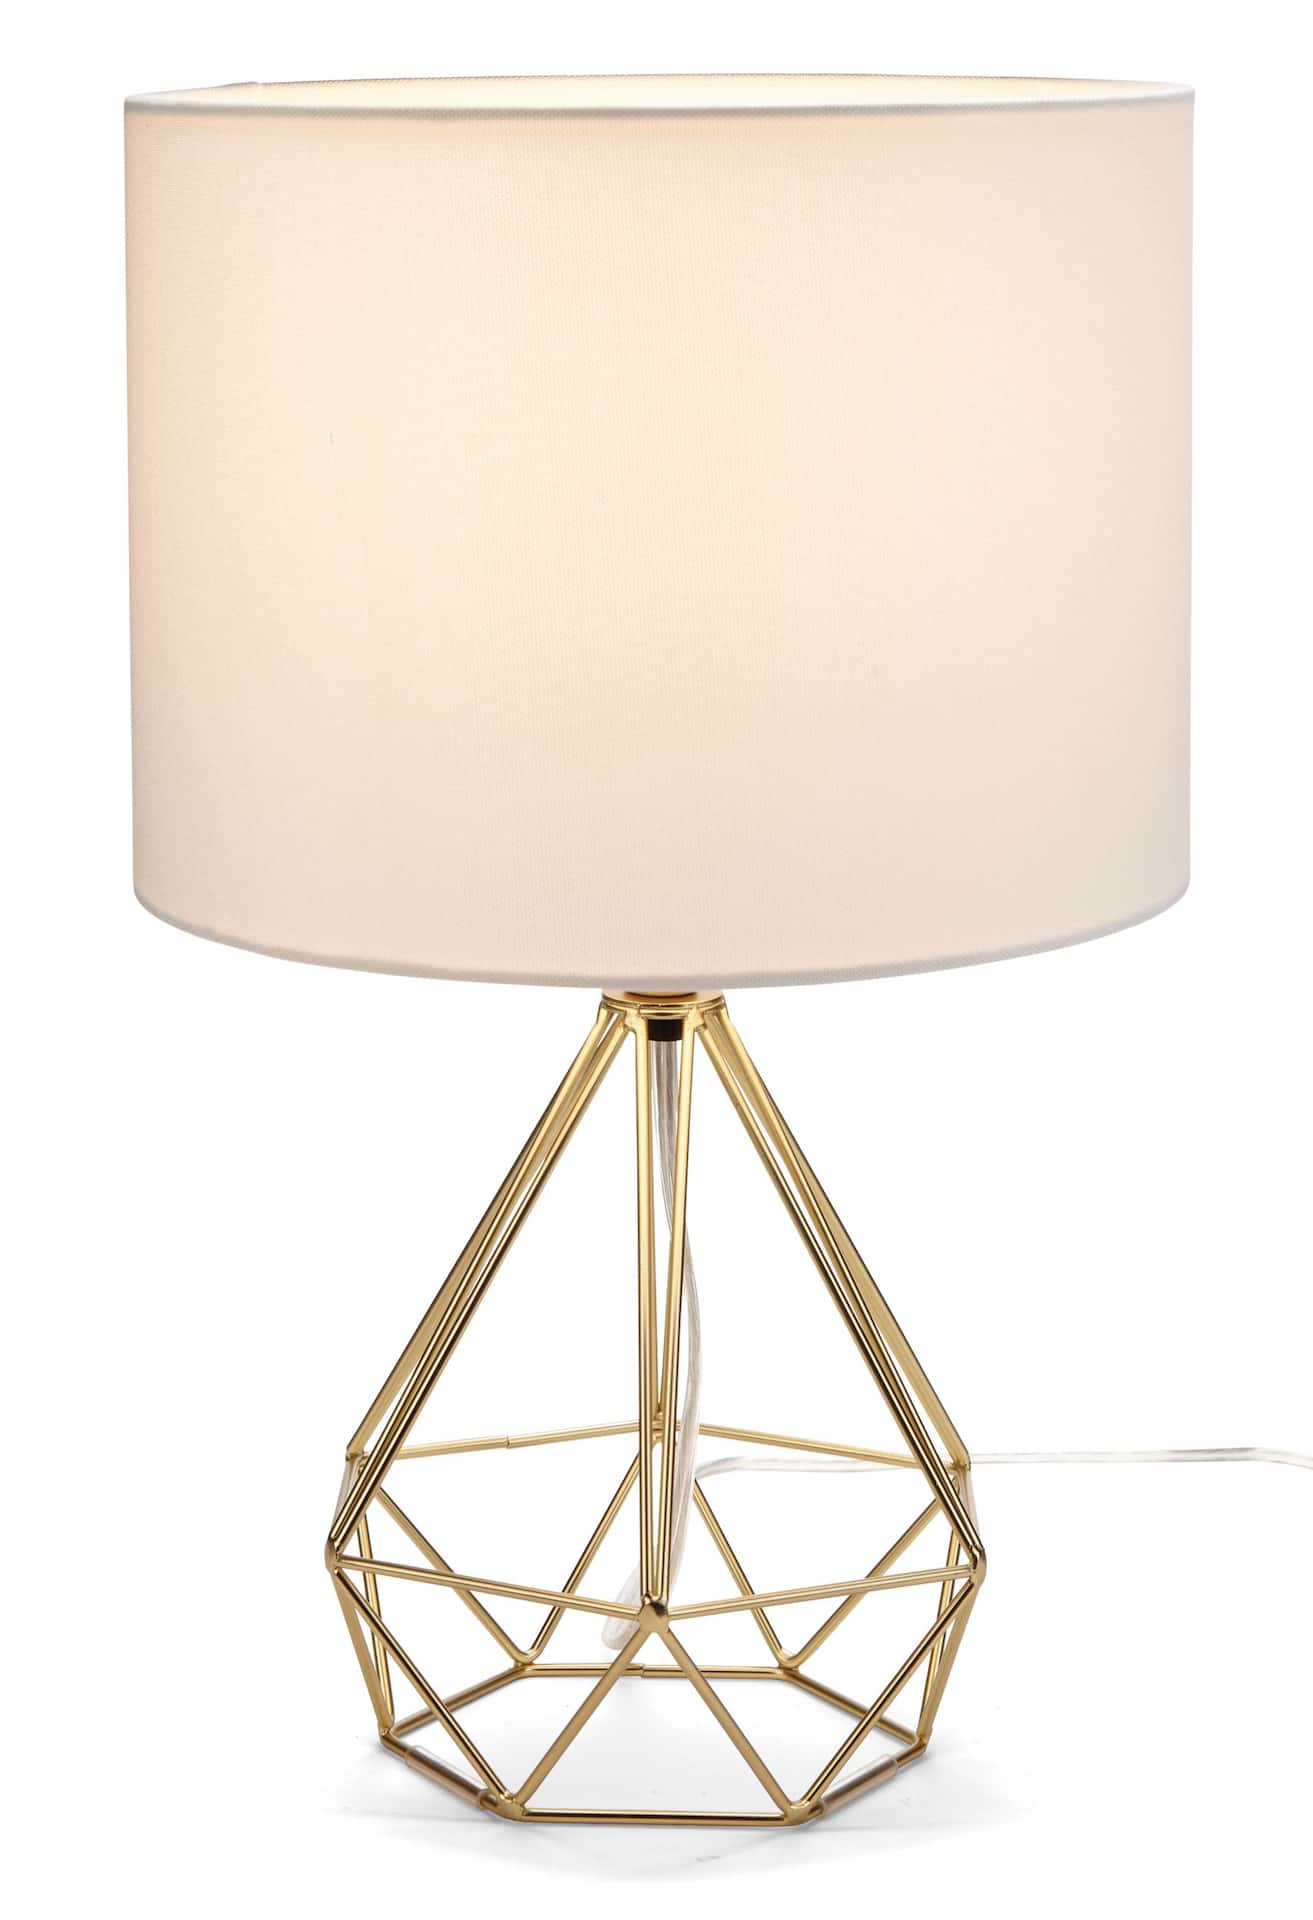 CANVAS Elita White Shade Geo Table Lamp, 16-in, Gold